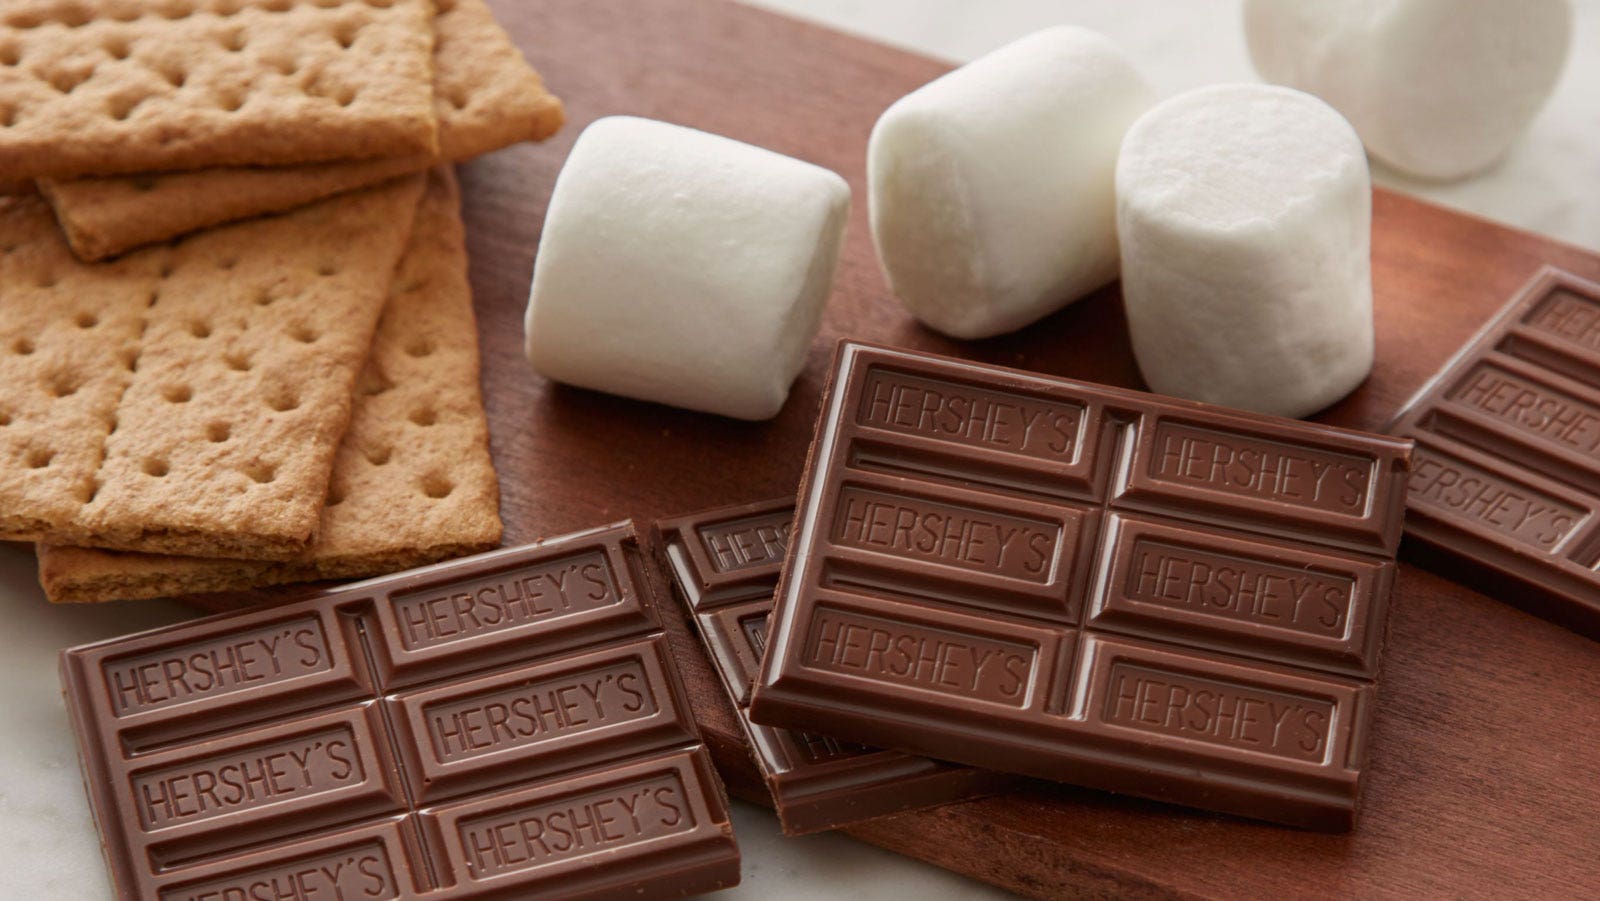 How To Make S’mores at Home